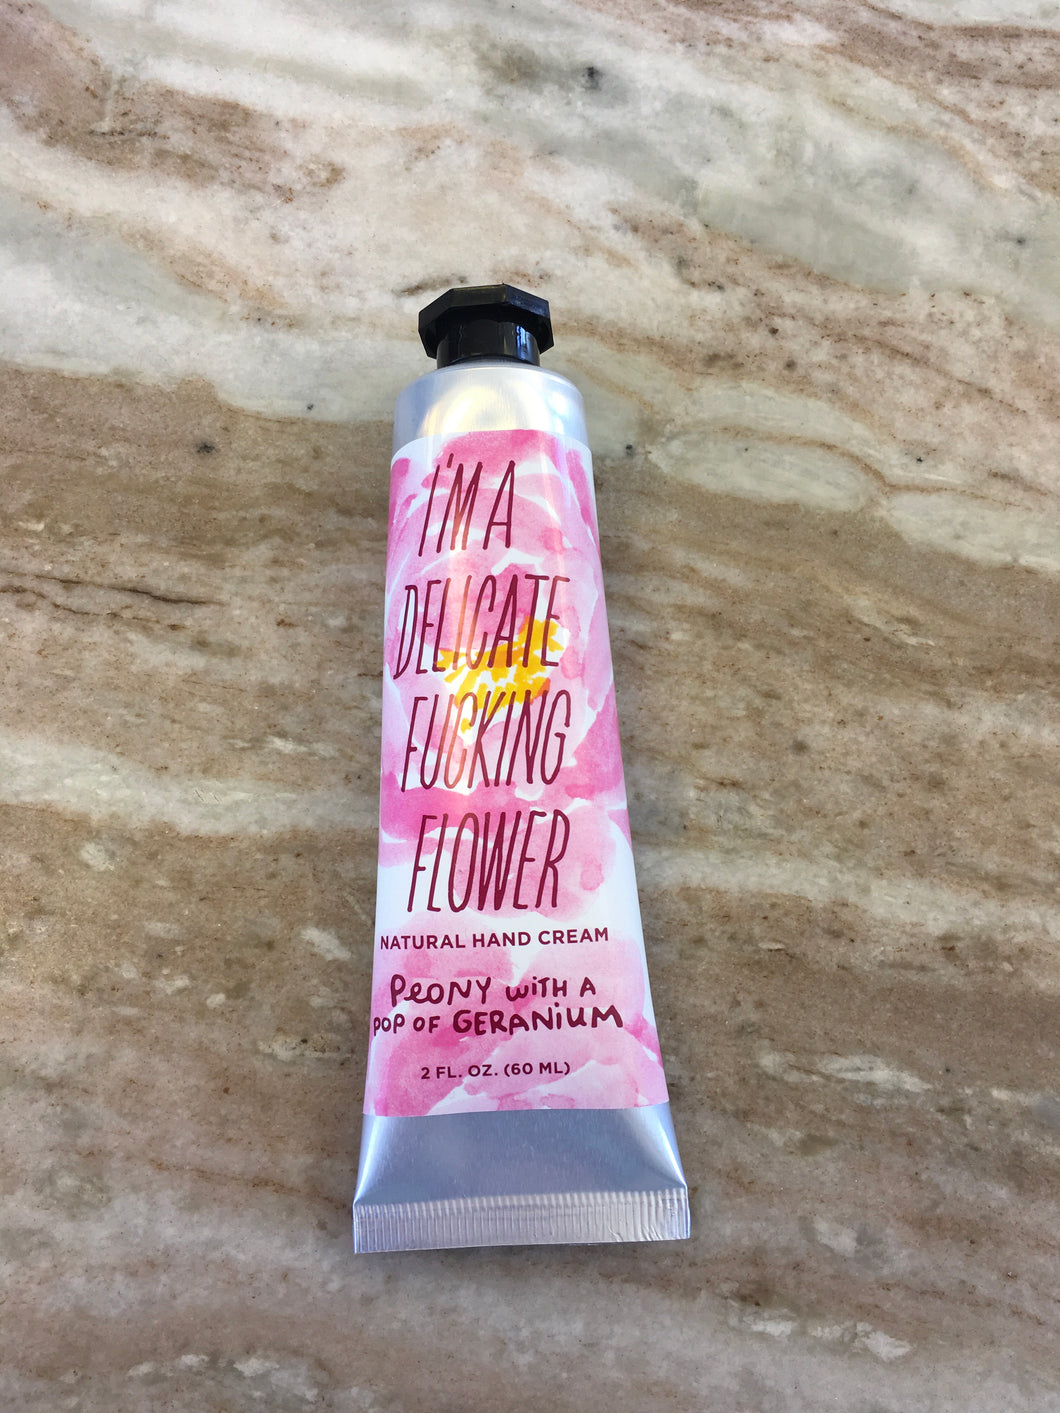 Delicate F-ing Flower Lotion